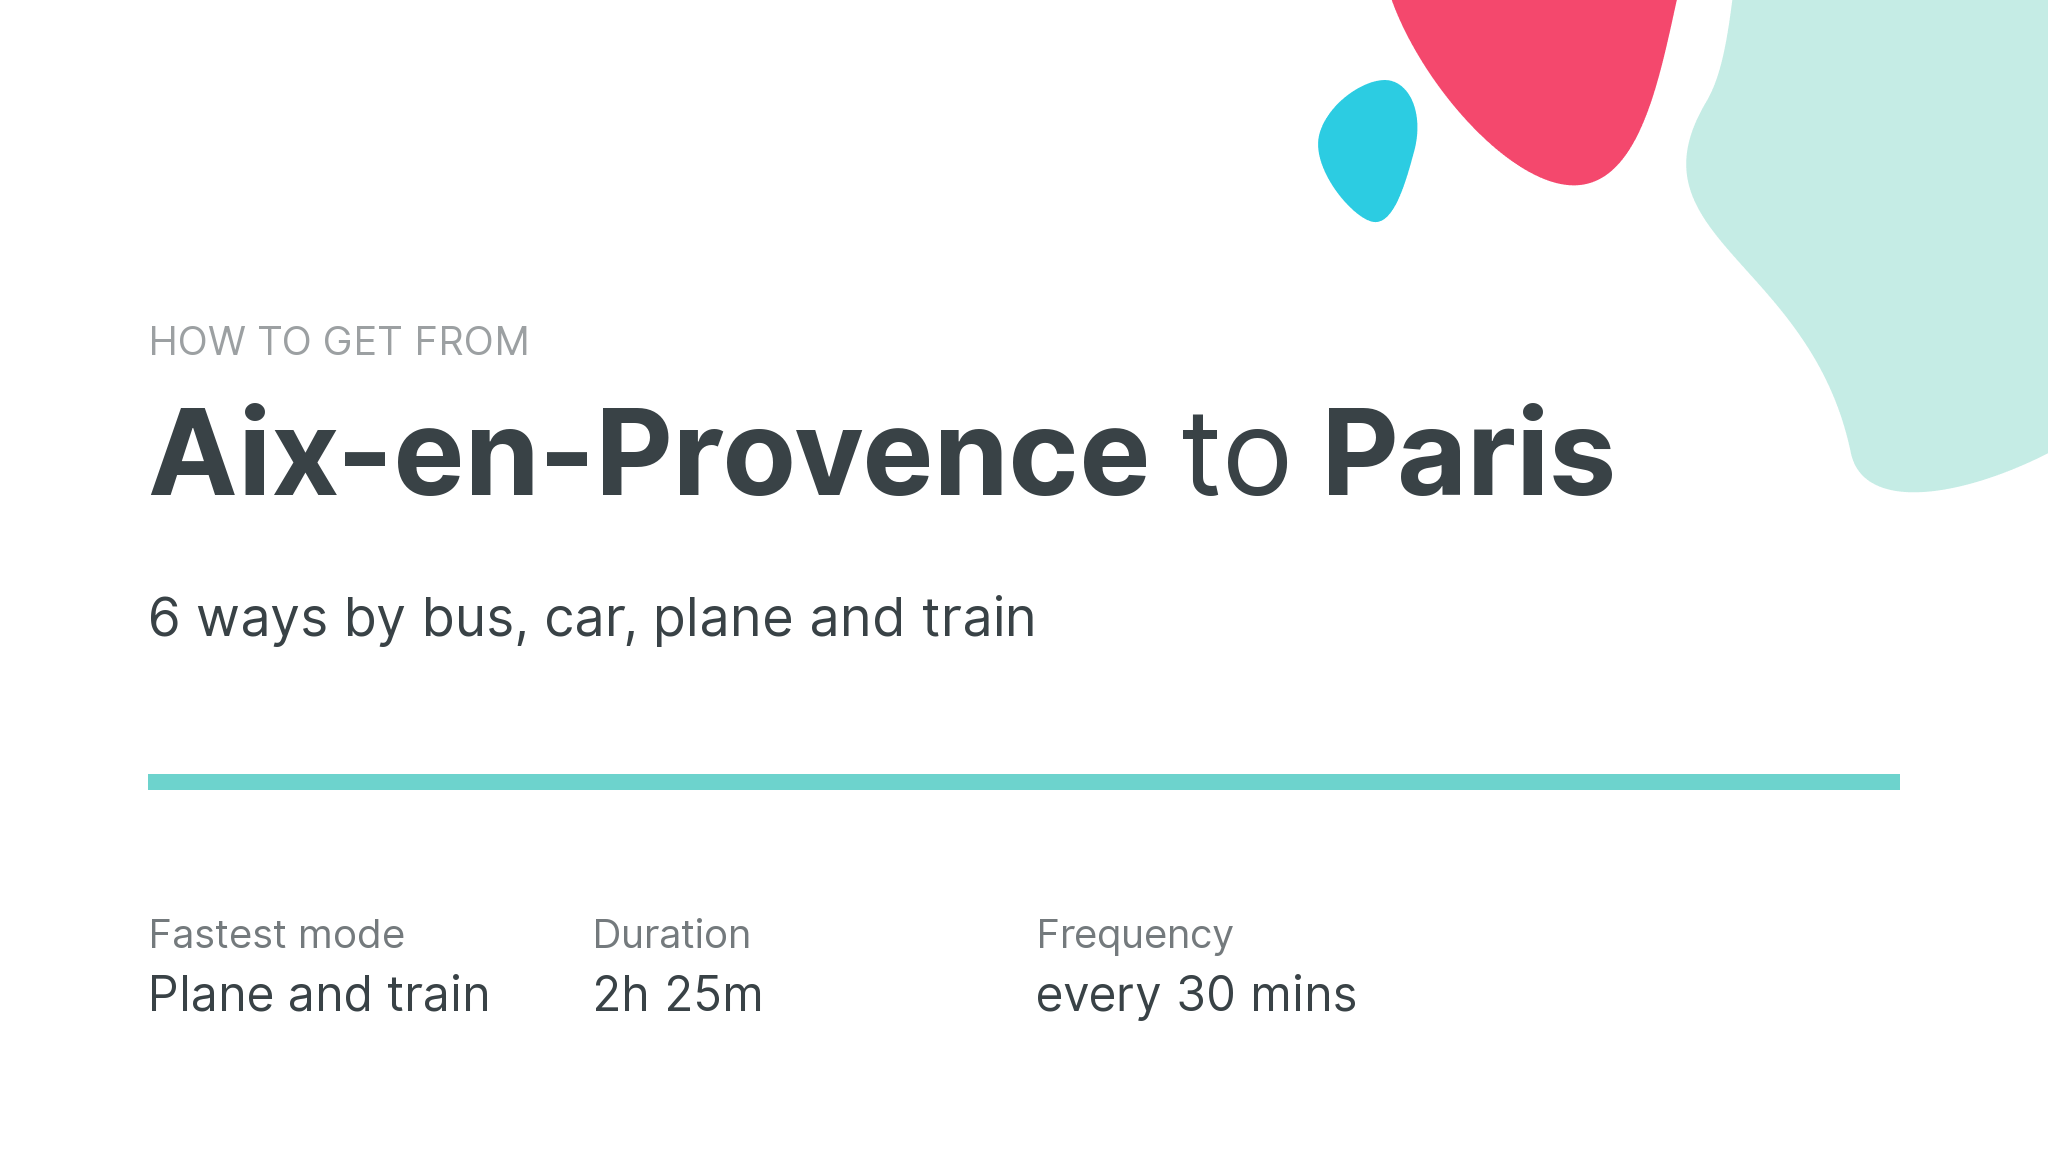 How do I get from Aix-en-Provence to Paris